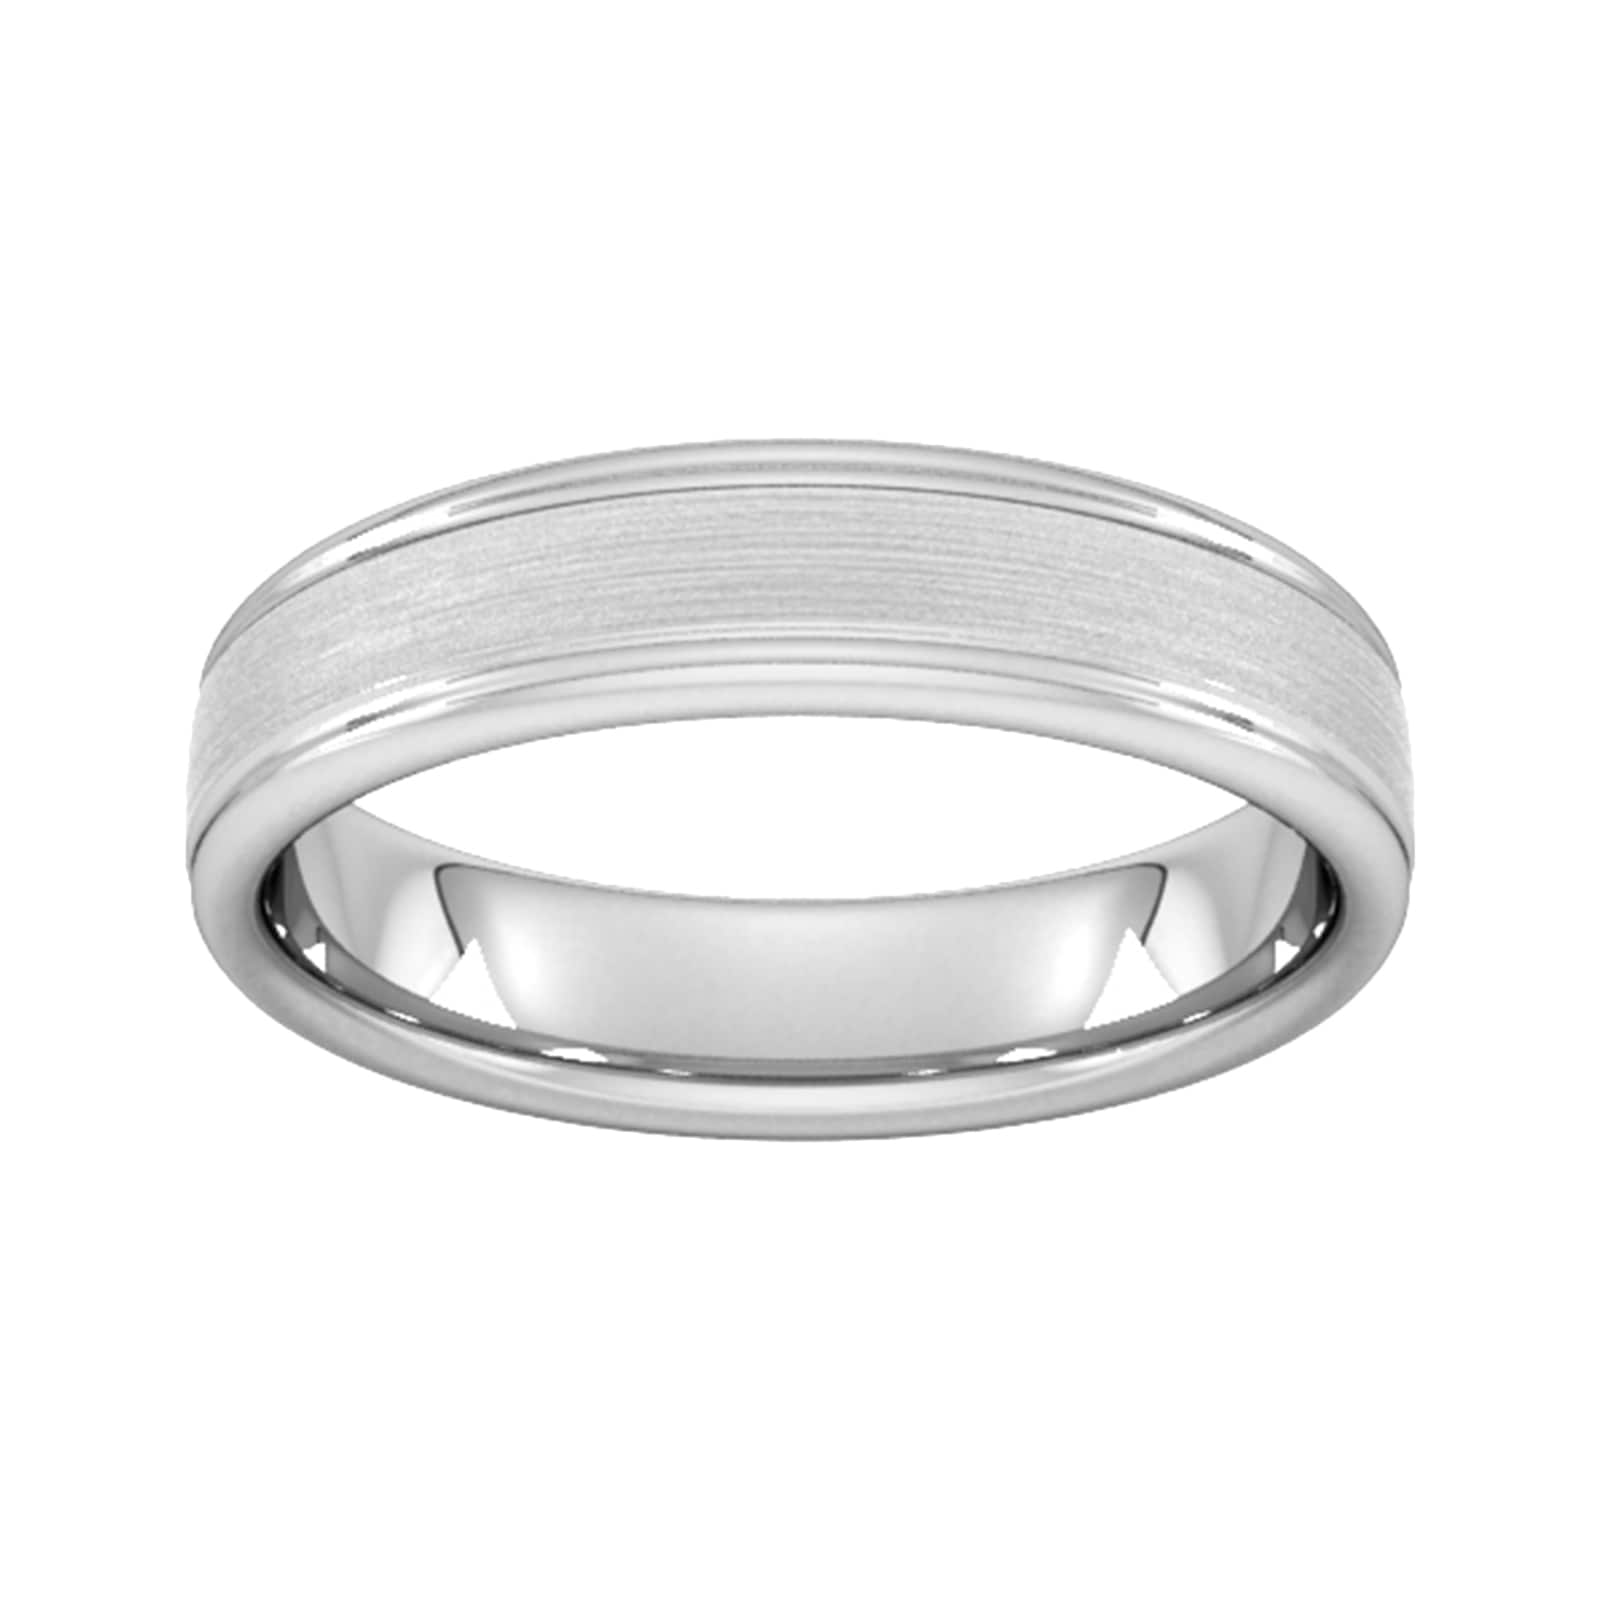 5mm D Shape Heavy Matt Centre With Grooves Wedding Ring In 9 Carat White Gold - Ring Size X